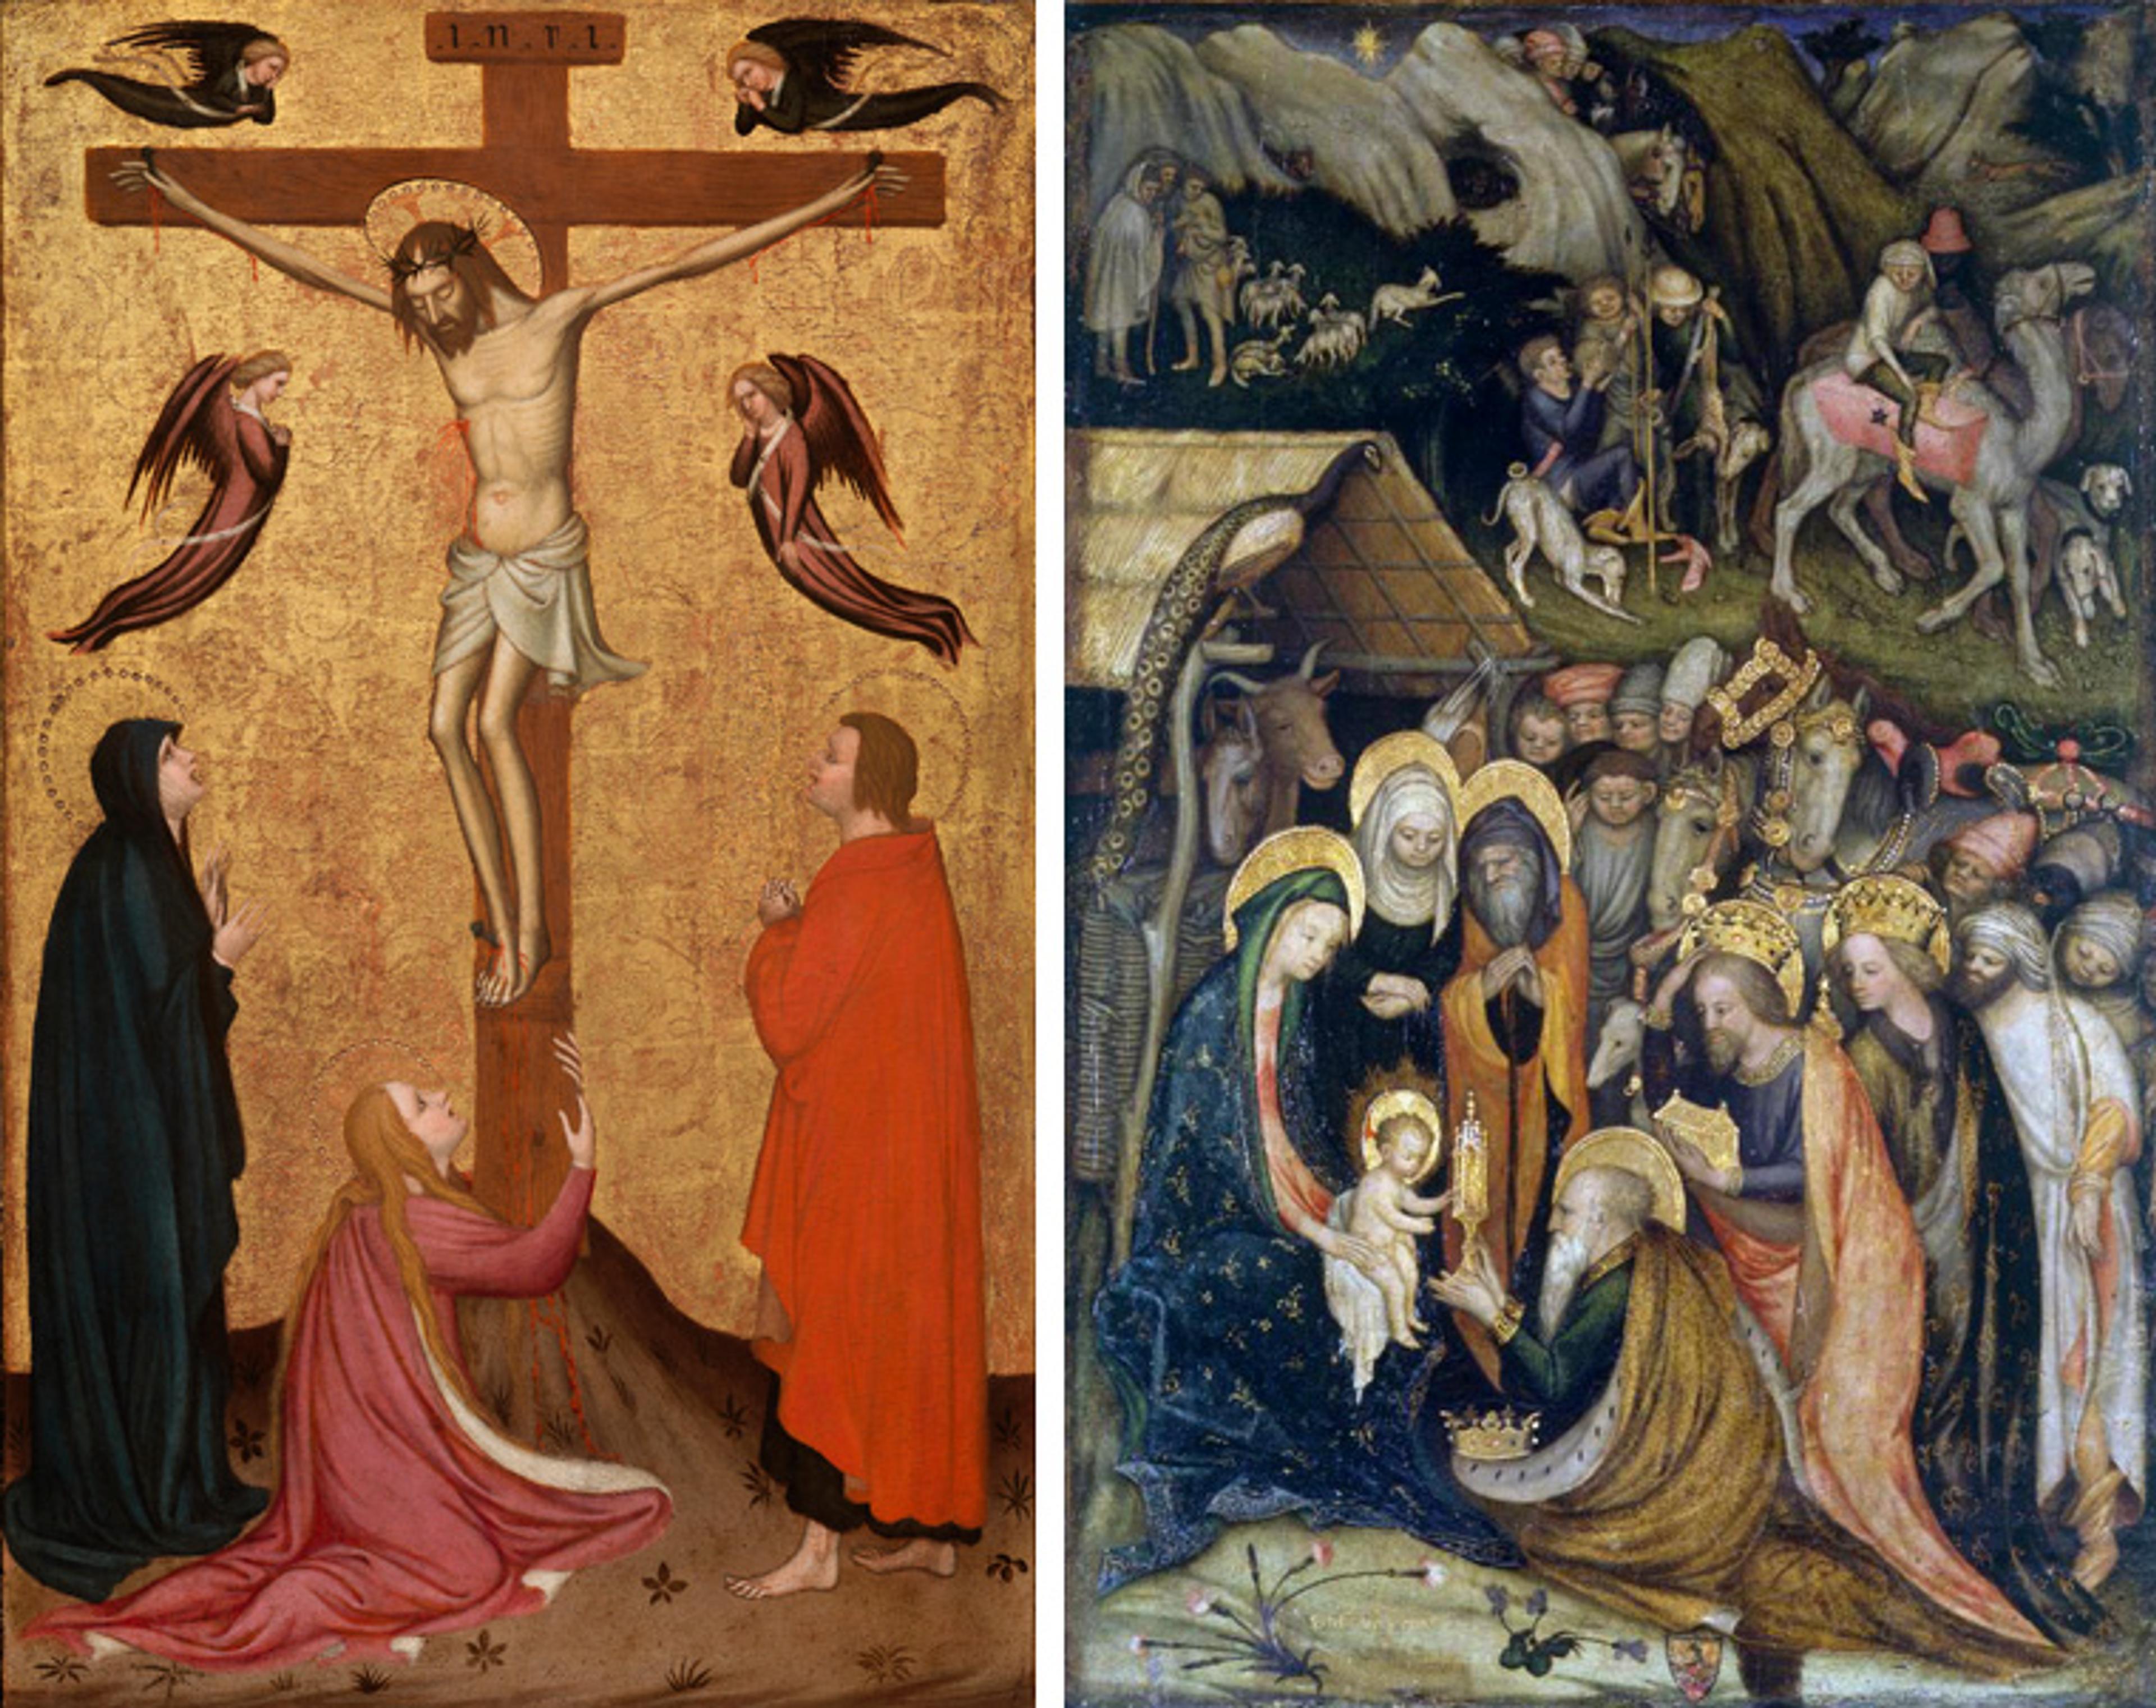 Two works by the Renaissance painter Stefano da Verona depicting biblical scenes: at left, a Crucifixion scene; at right, a scene of the Adoration of the Magi